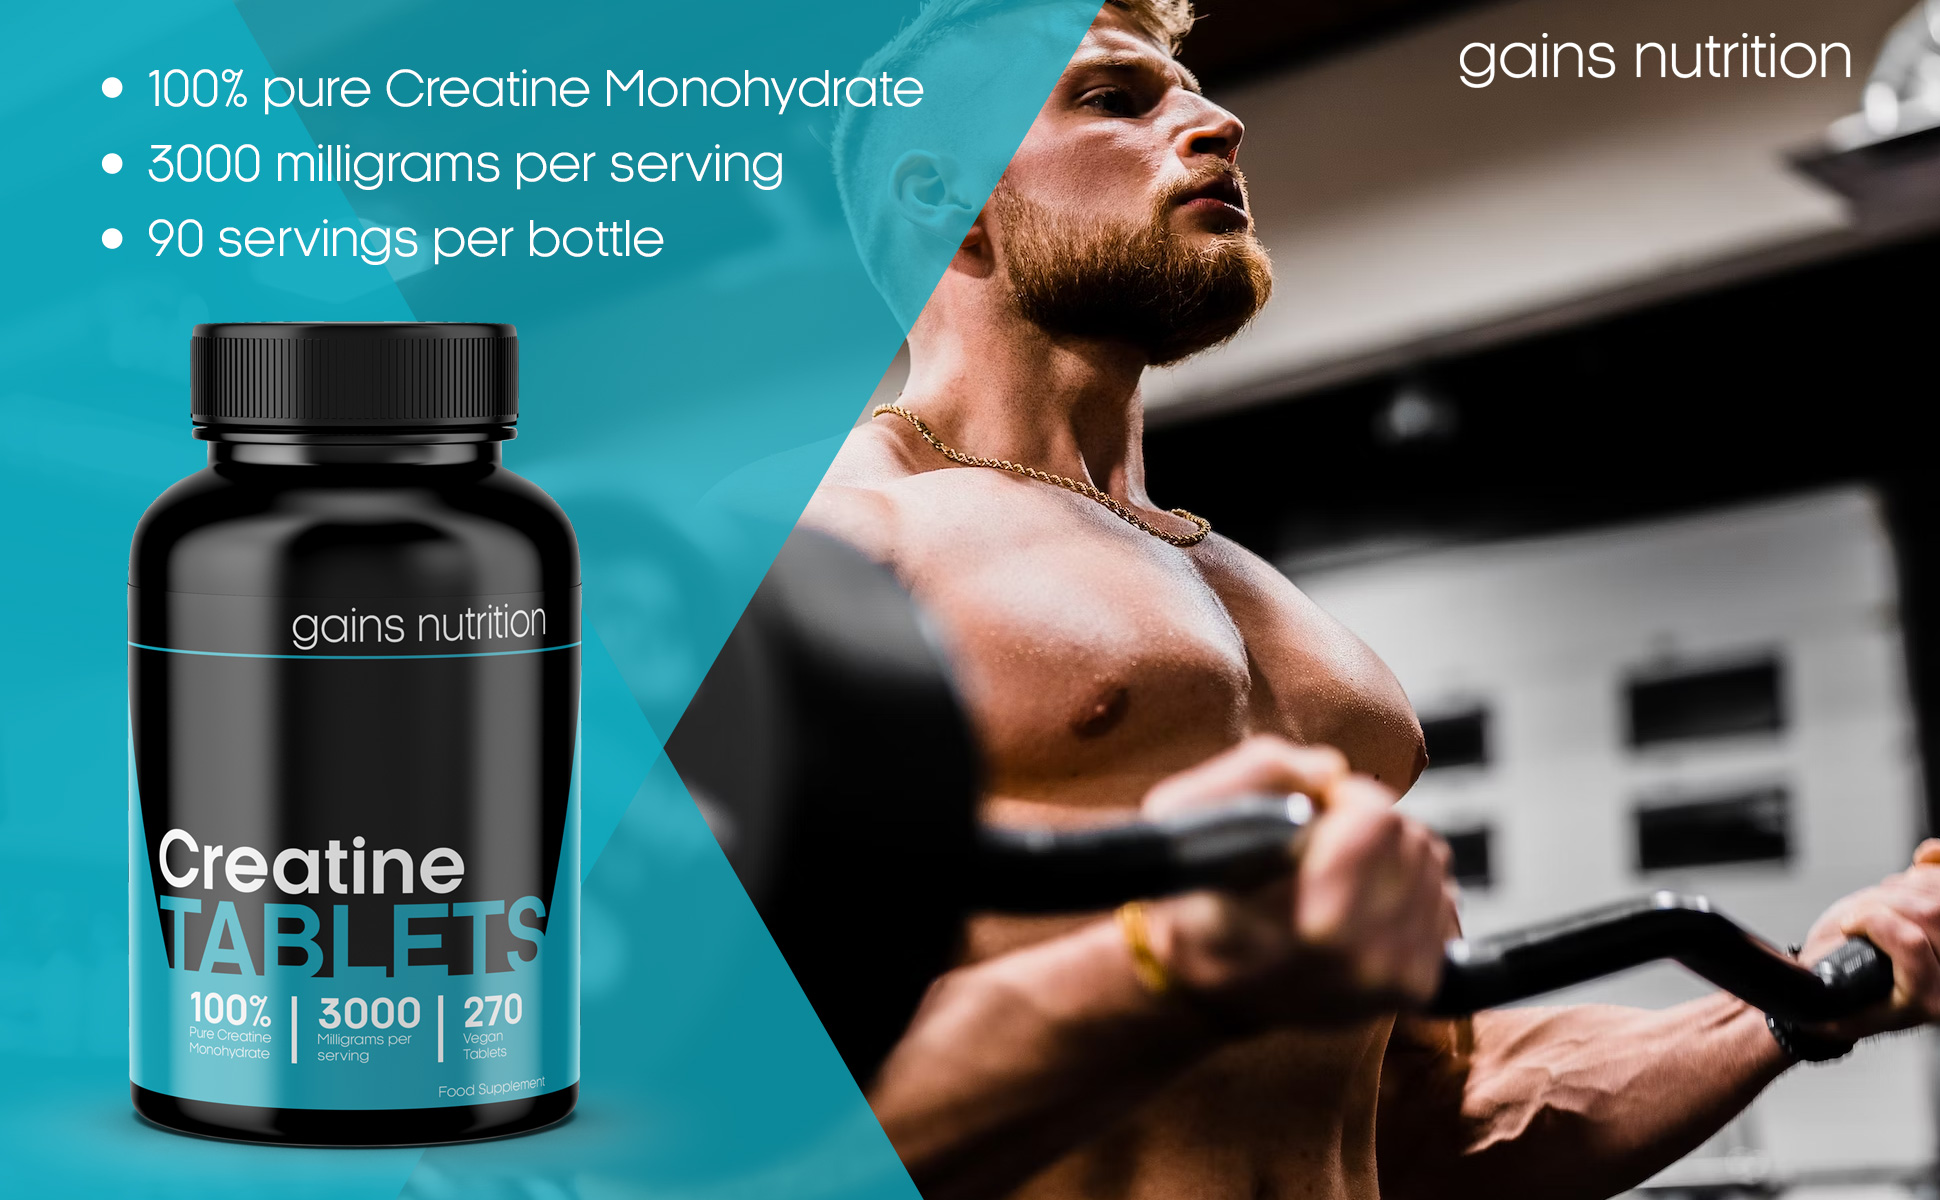 Creatine Monohydrate Tablets 3000mg per serving